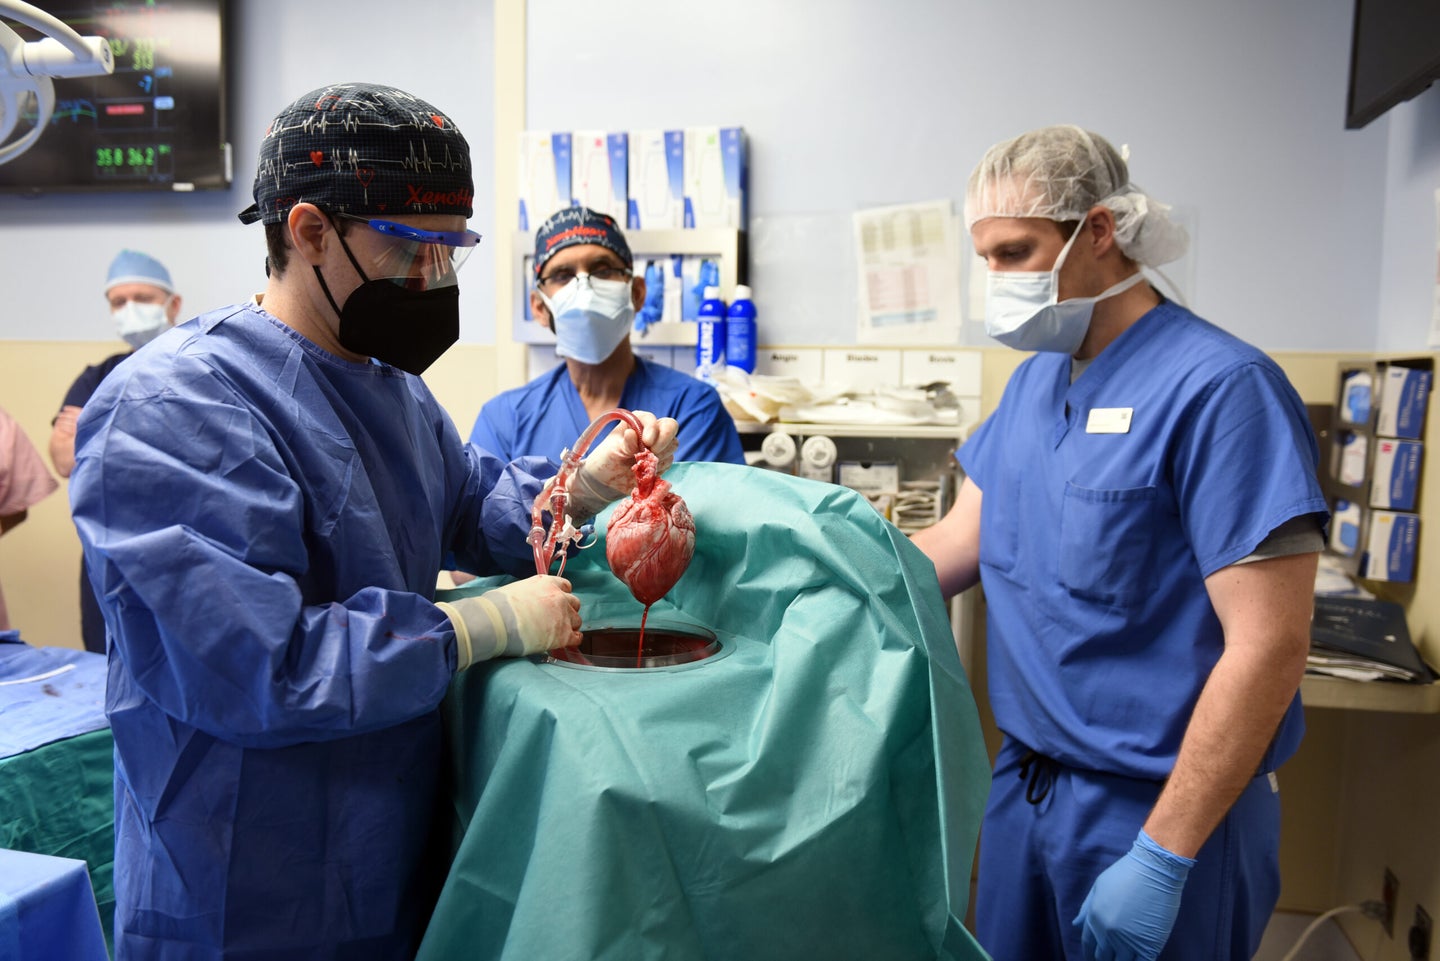 three surgeons in blue scrubs, face masks, gloves, and sanitary gear are in an operating room standing next to a surgical bench covered in blue clothe. the surgeon on the left holds up a heart